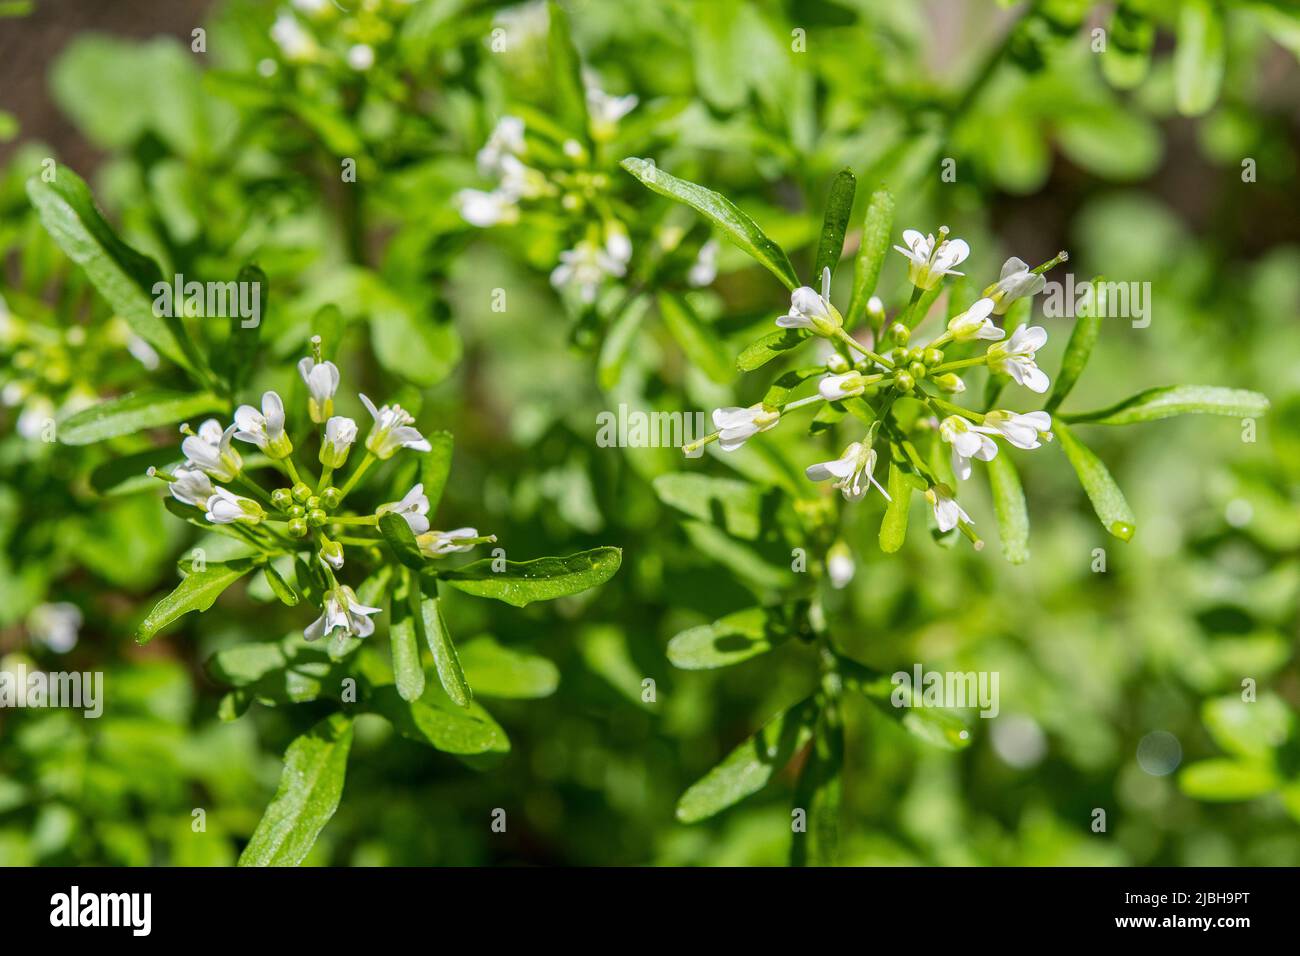 Cardamine flexuosa, commonly known as wavy bittercress or wood bitter-cress. Stock Photo